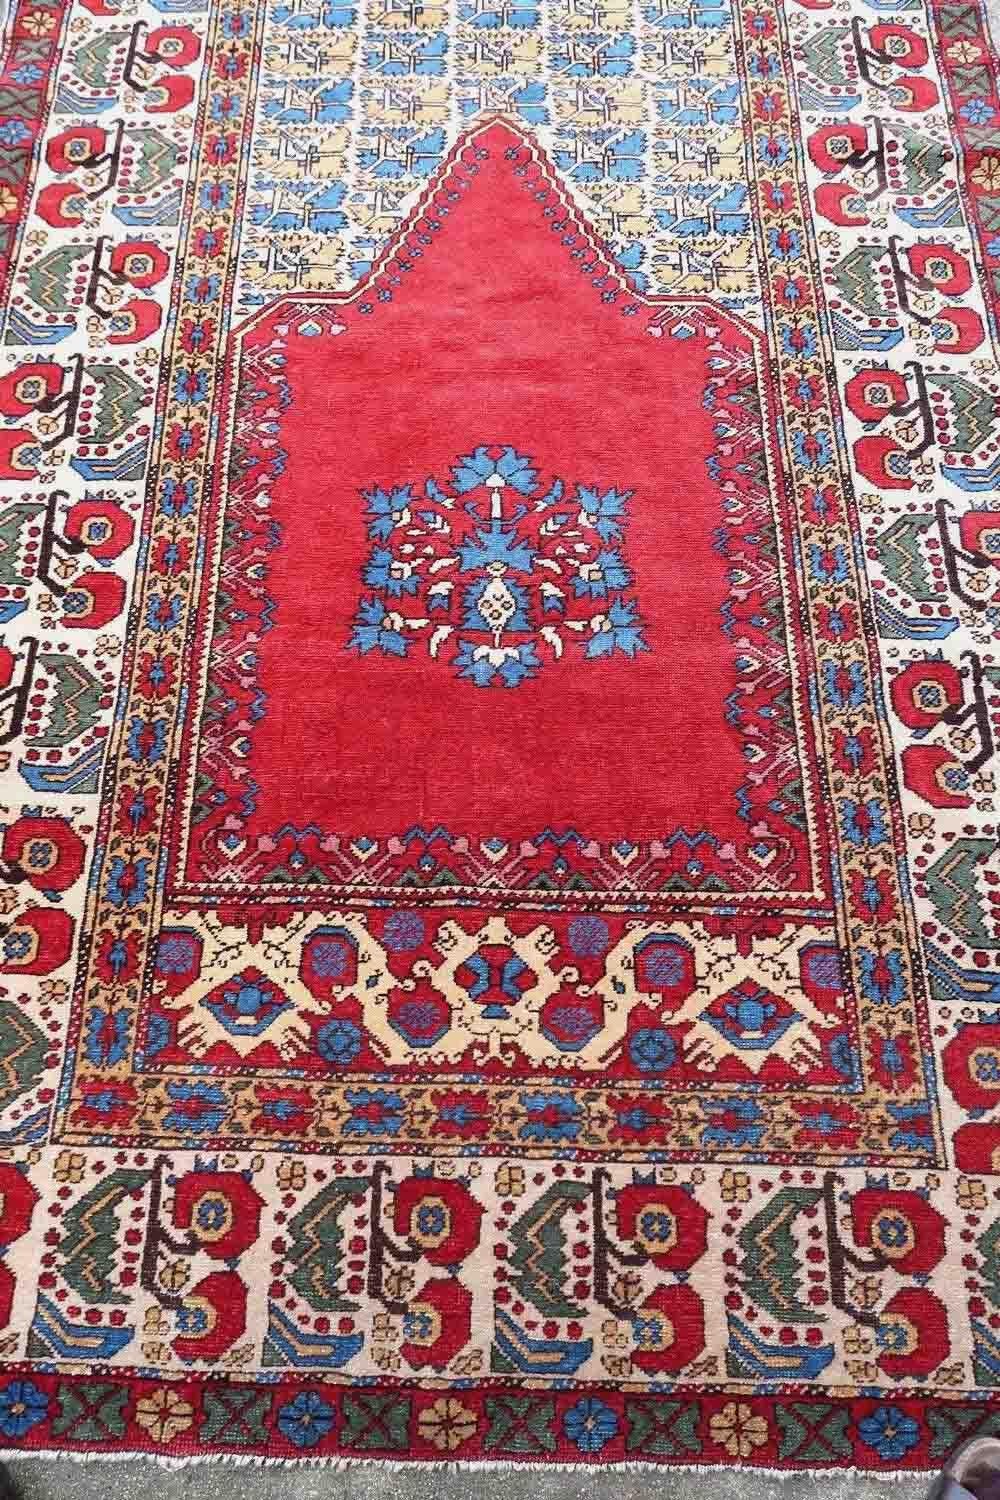 Handmade antique Turkish Transylvania prayer rug in bright natural dyes. The rug is from the end of 19th century in original good condition.

-condition: original good,

-circa: 1880s,

-size: 4.4' x 7.7' (135cm x 236cm),

-material: